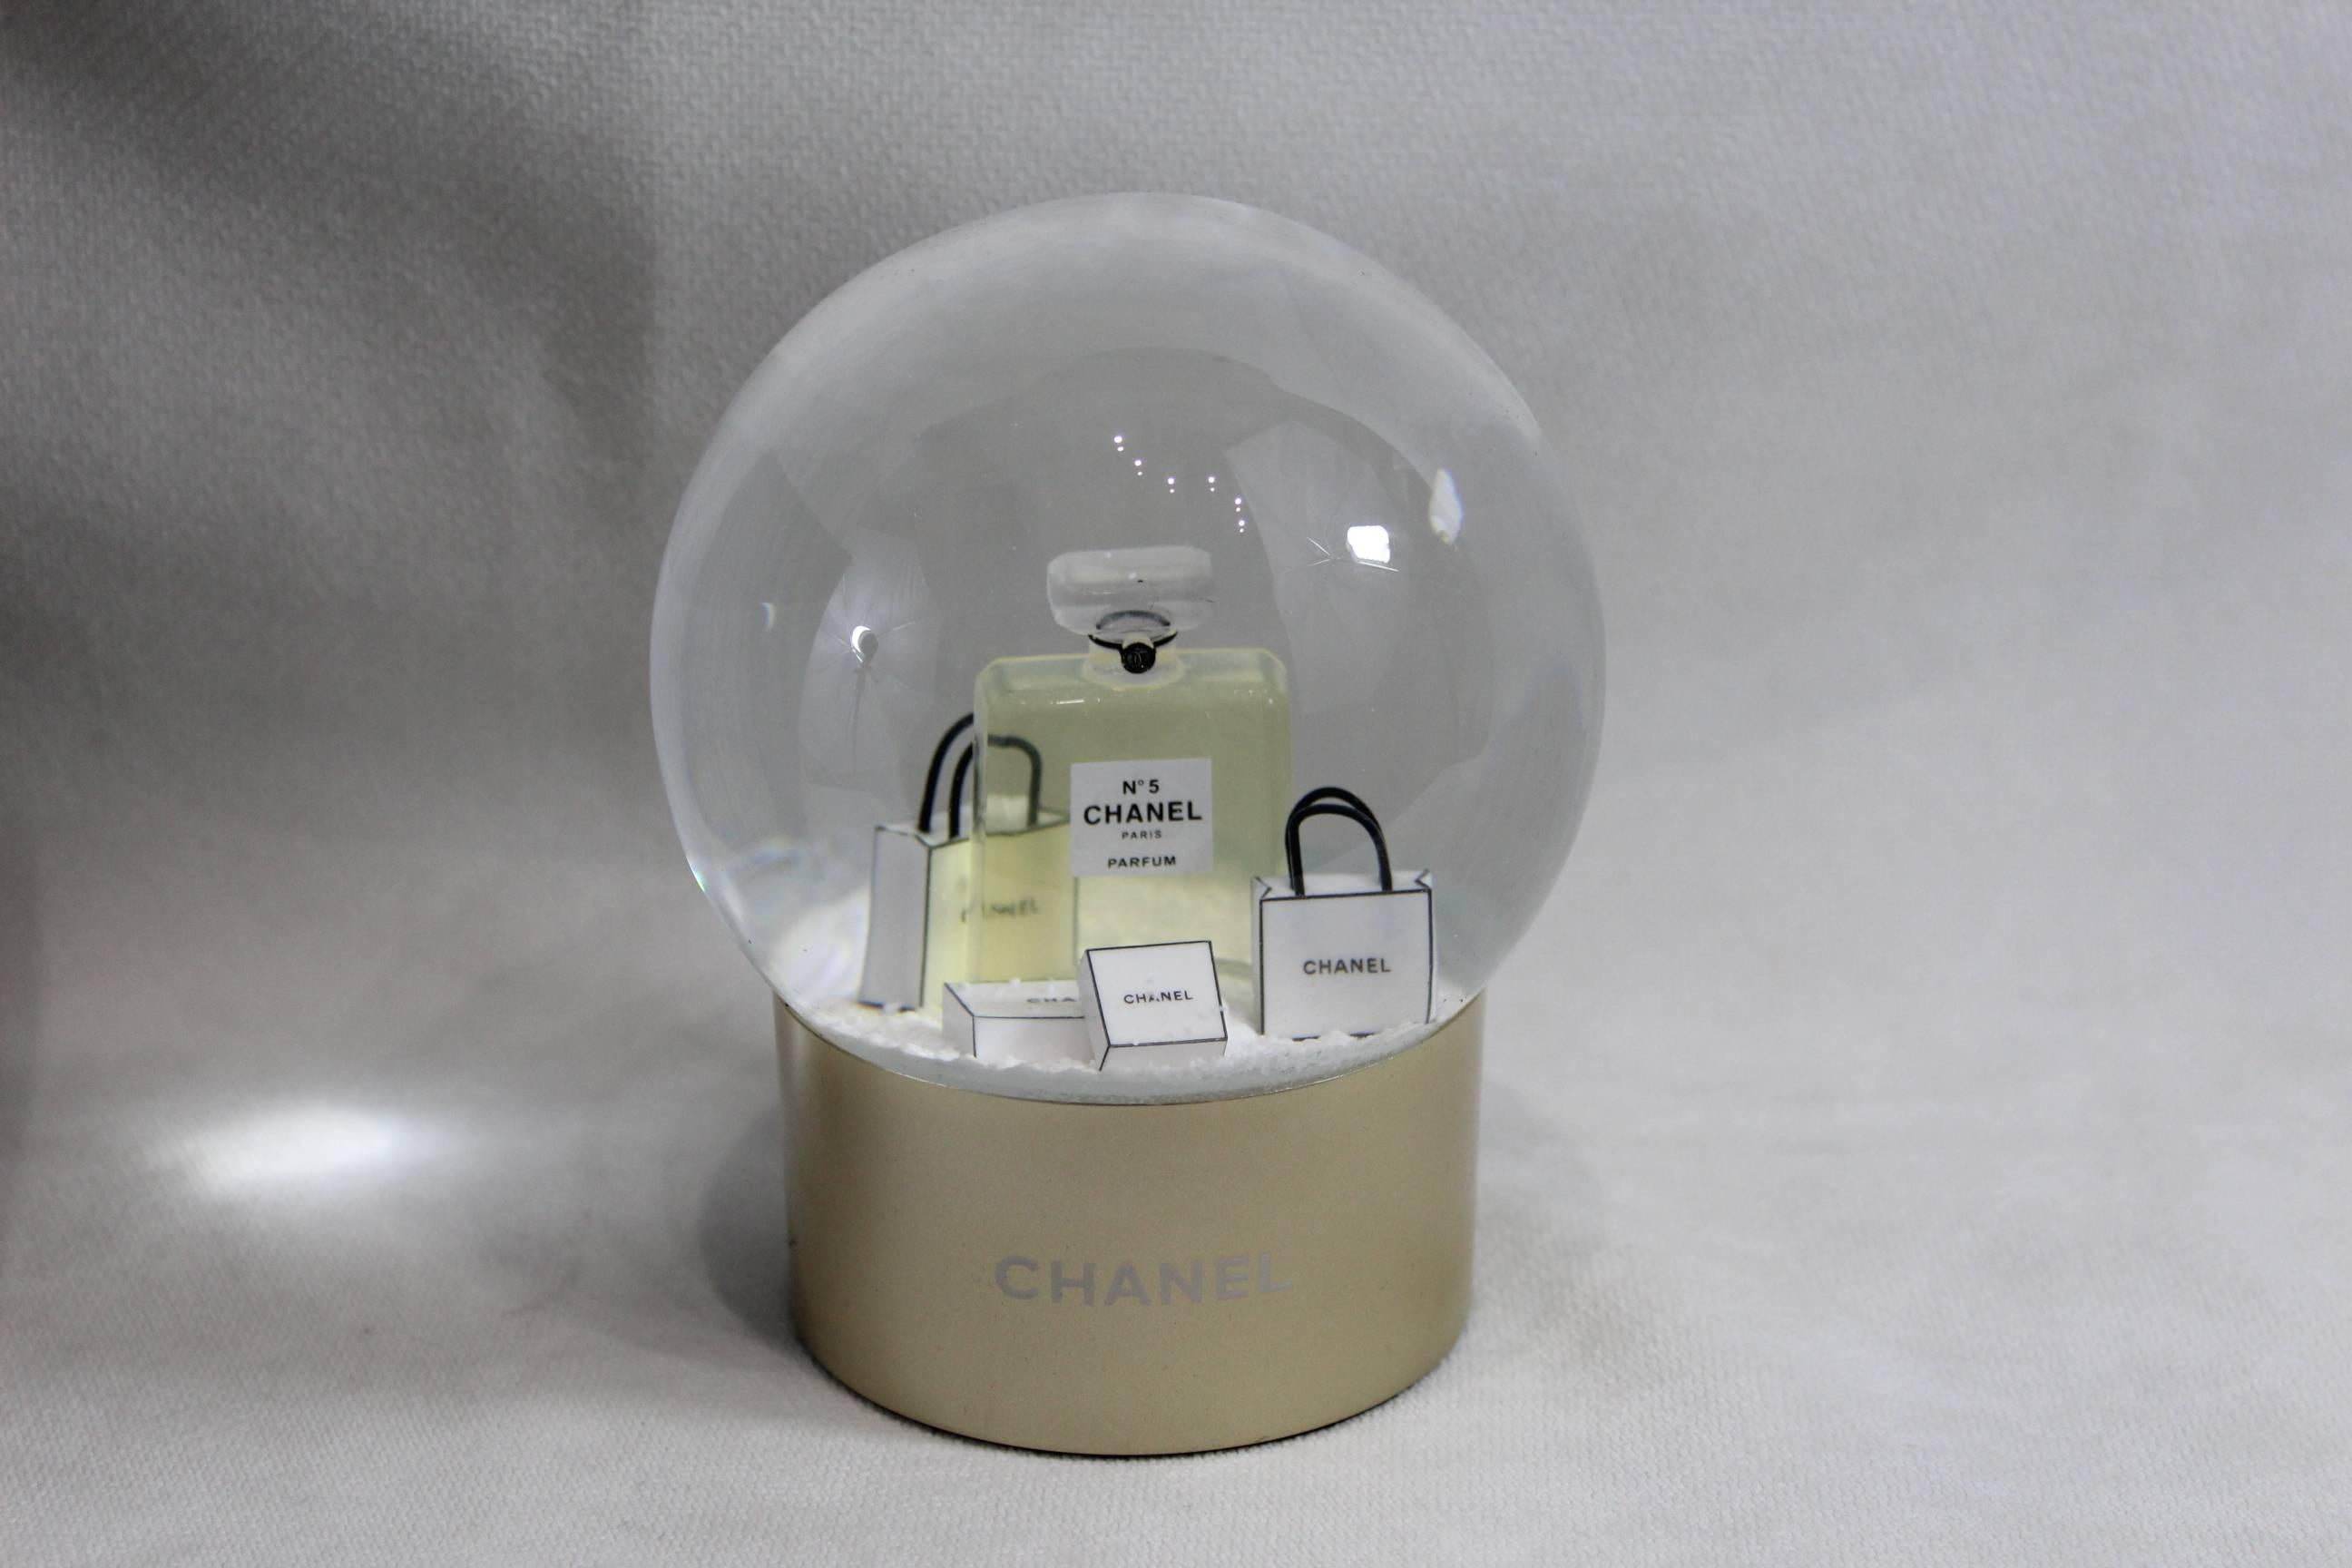 Gray 2015 Chanel Snowball / dome representing the iconic shopping bags